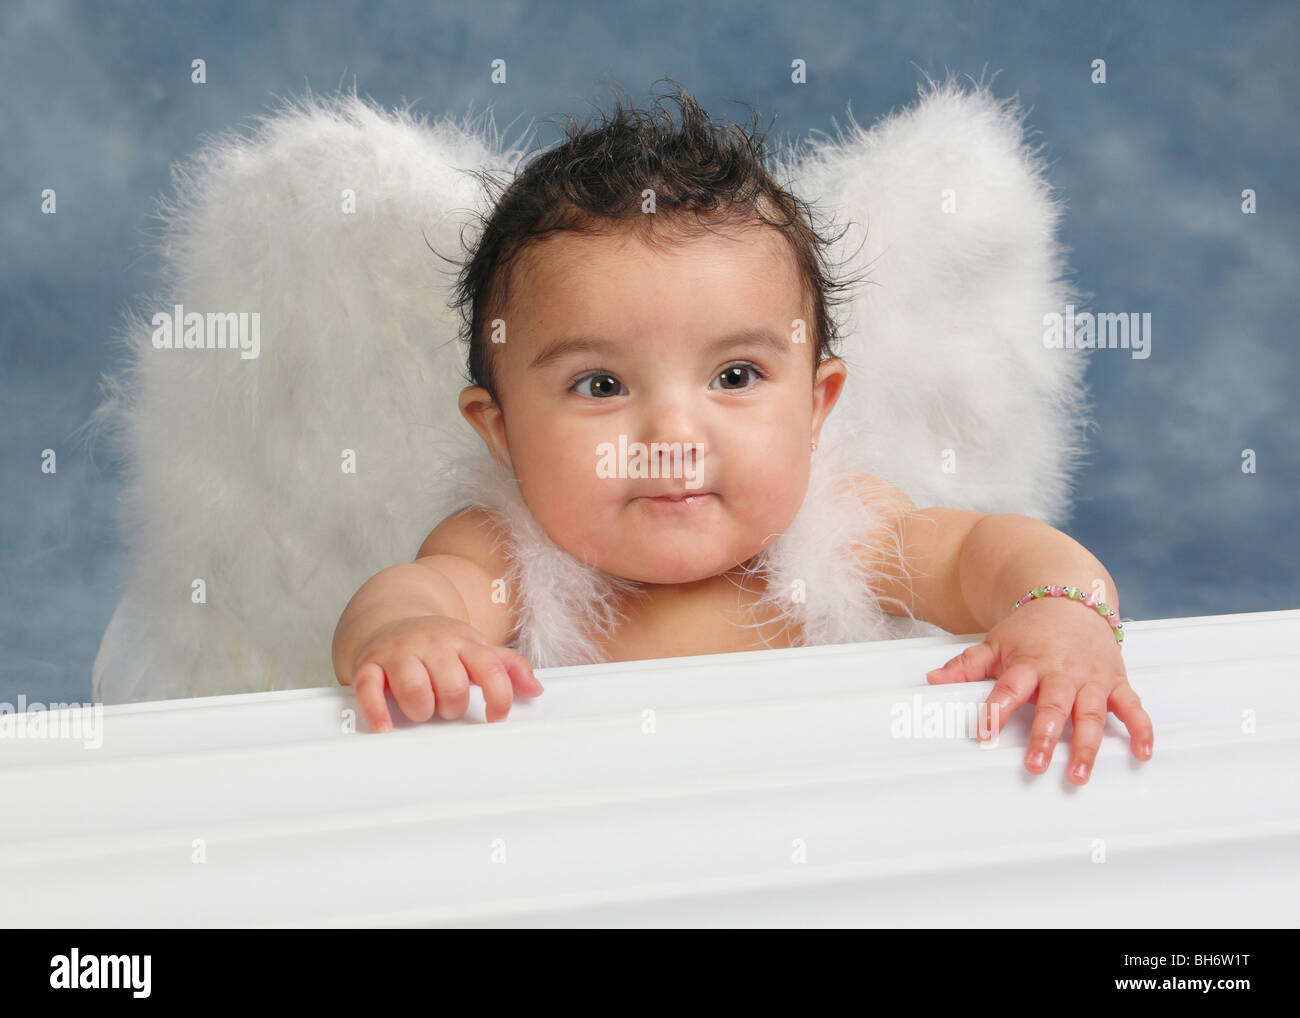 Hispanic baby girl with funny look on her face and wearing angel wings in a studio Stock Photo